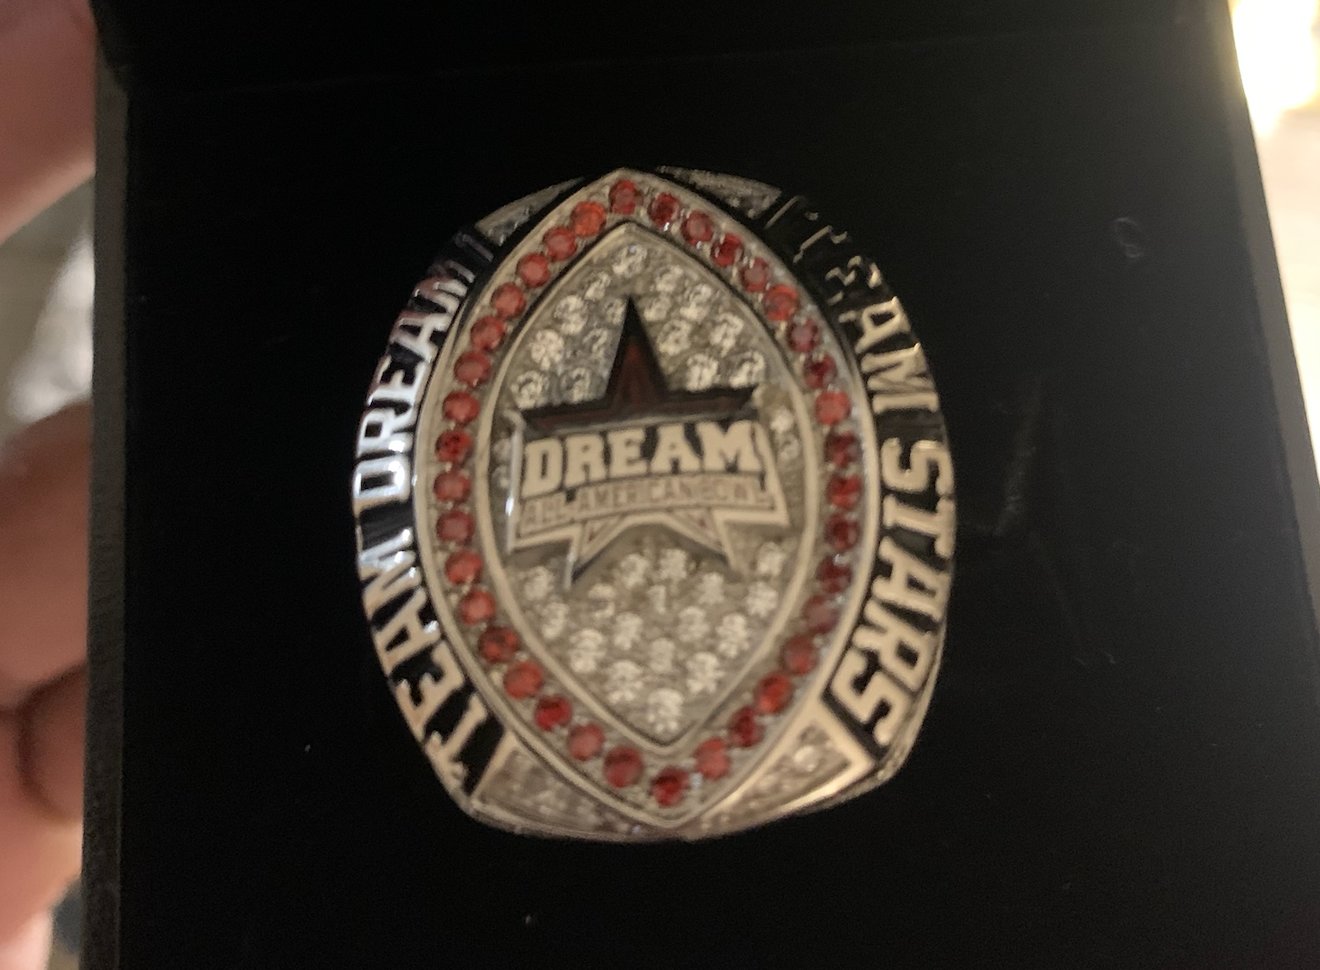 Each player who participated in the Dream All-American Bowl received a ring.